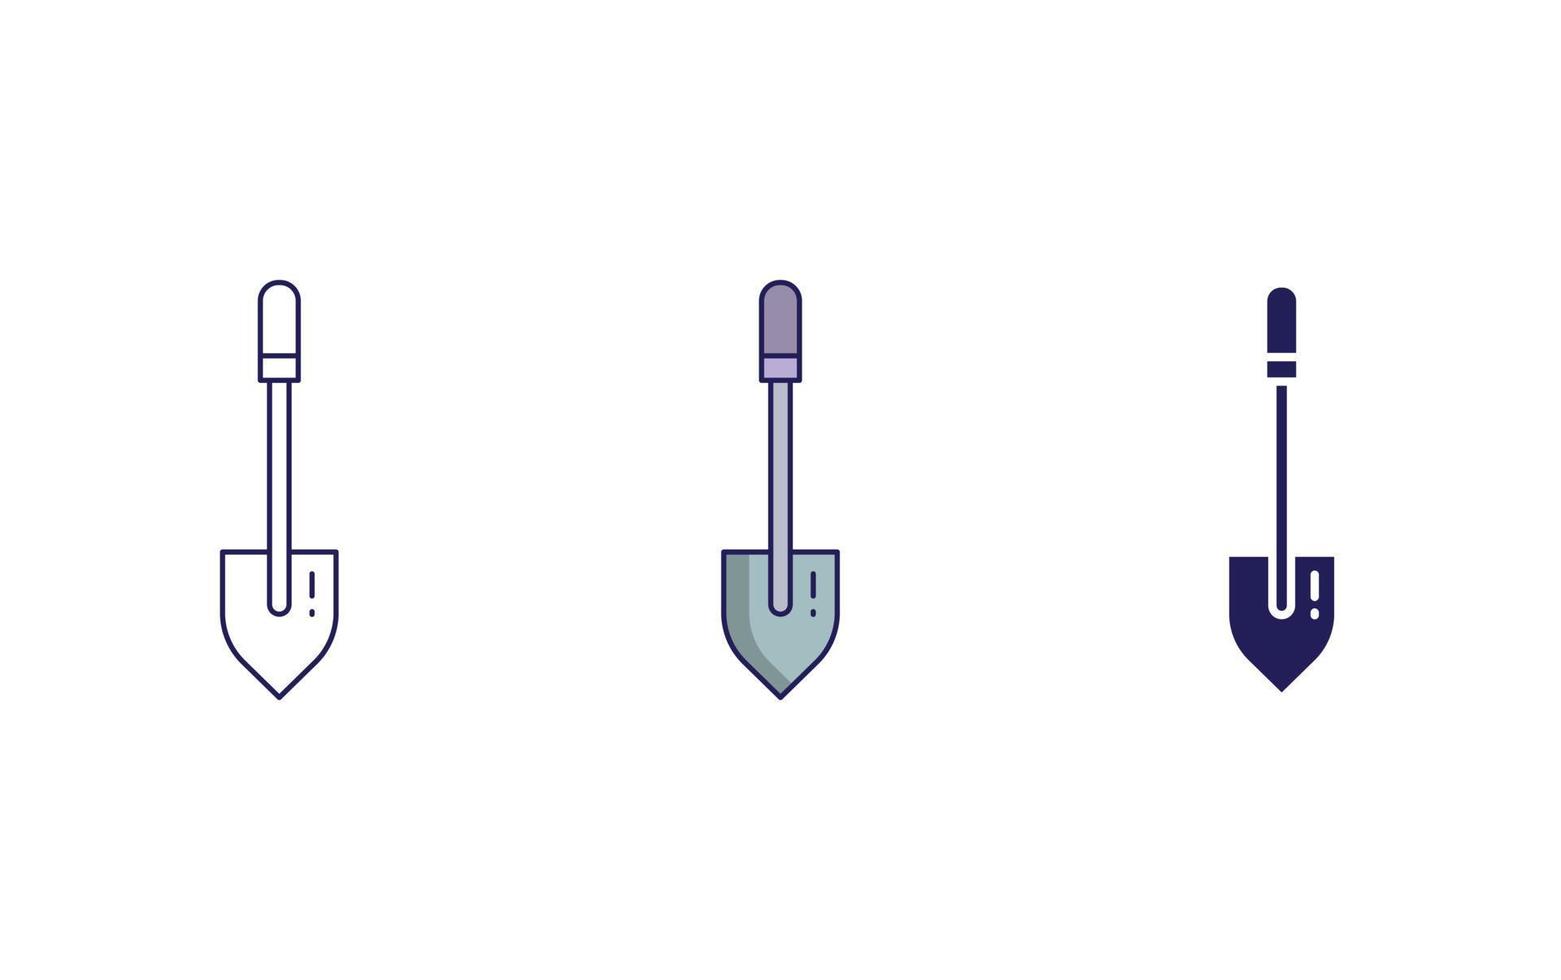 Paddle vector icon